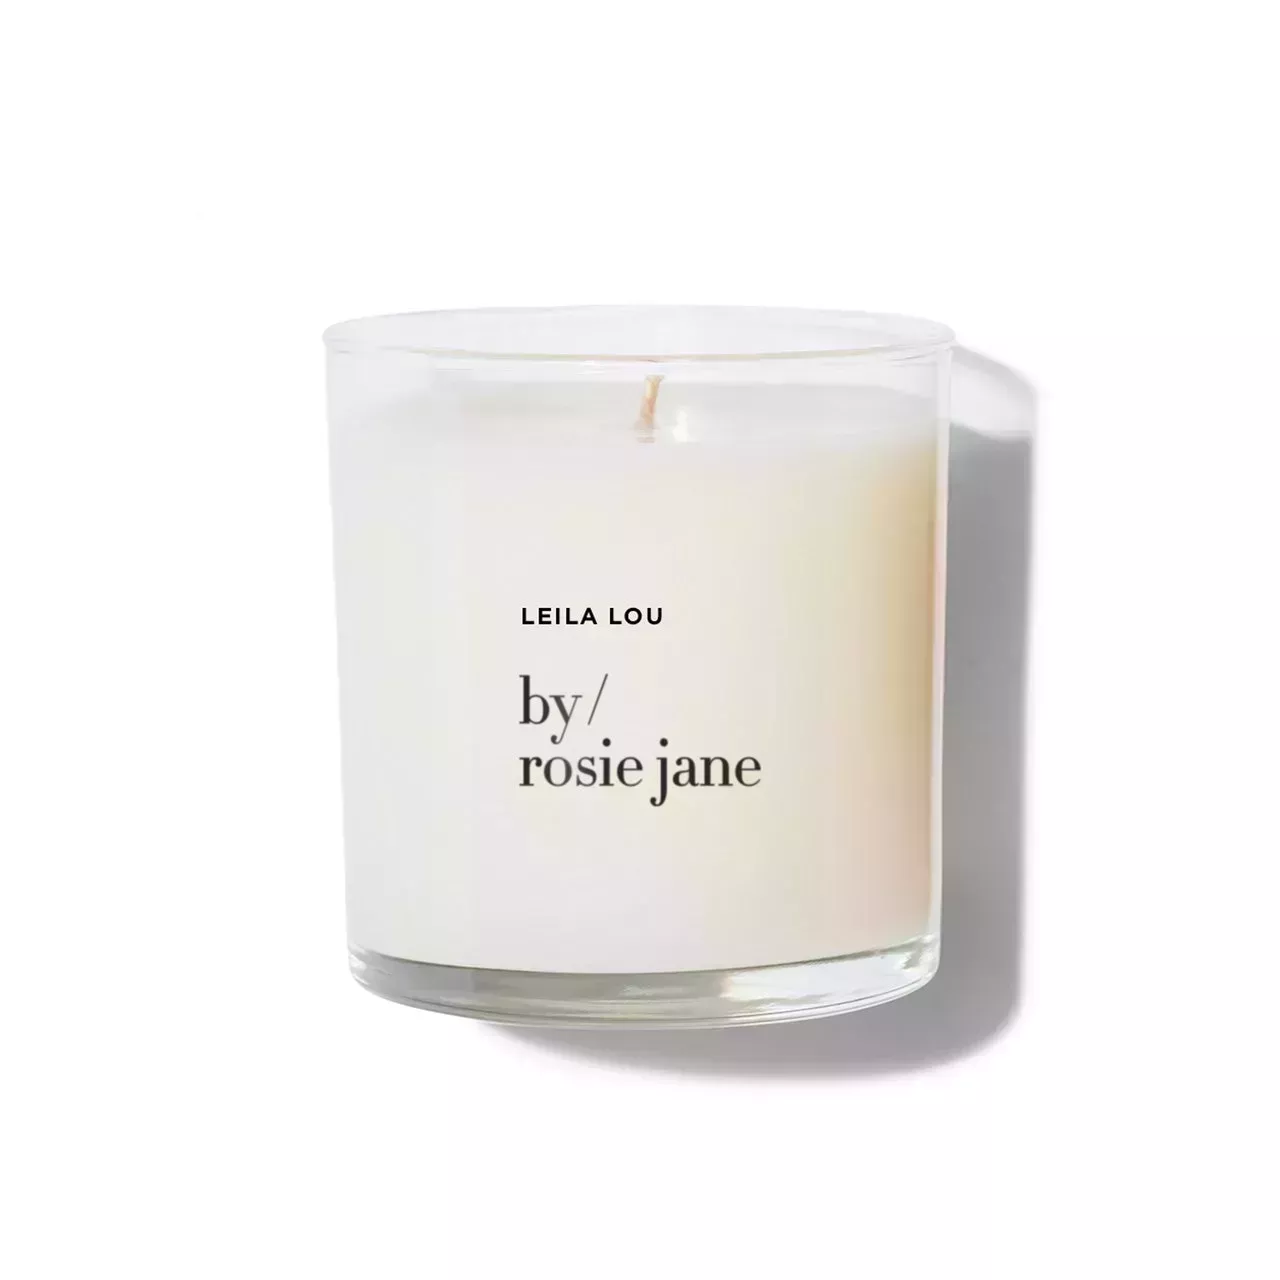 By Rosie Jane Leila Lou Candle on white background